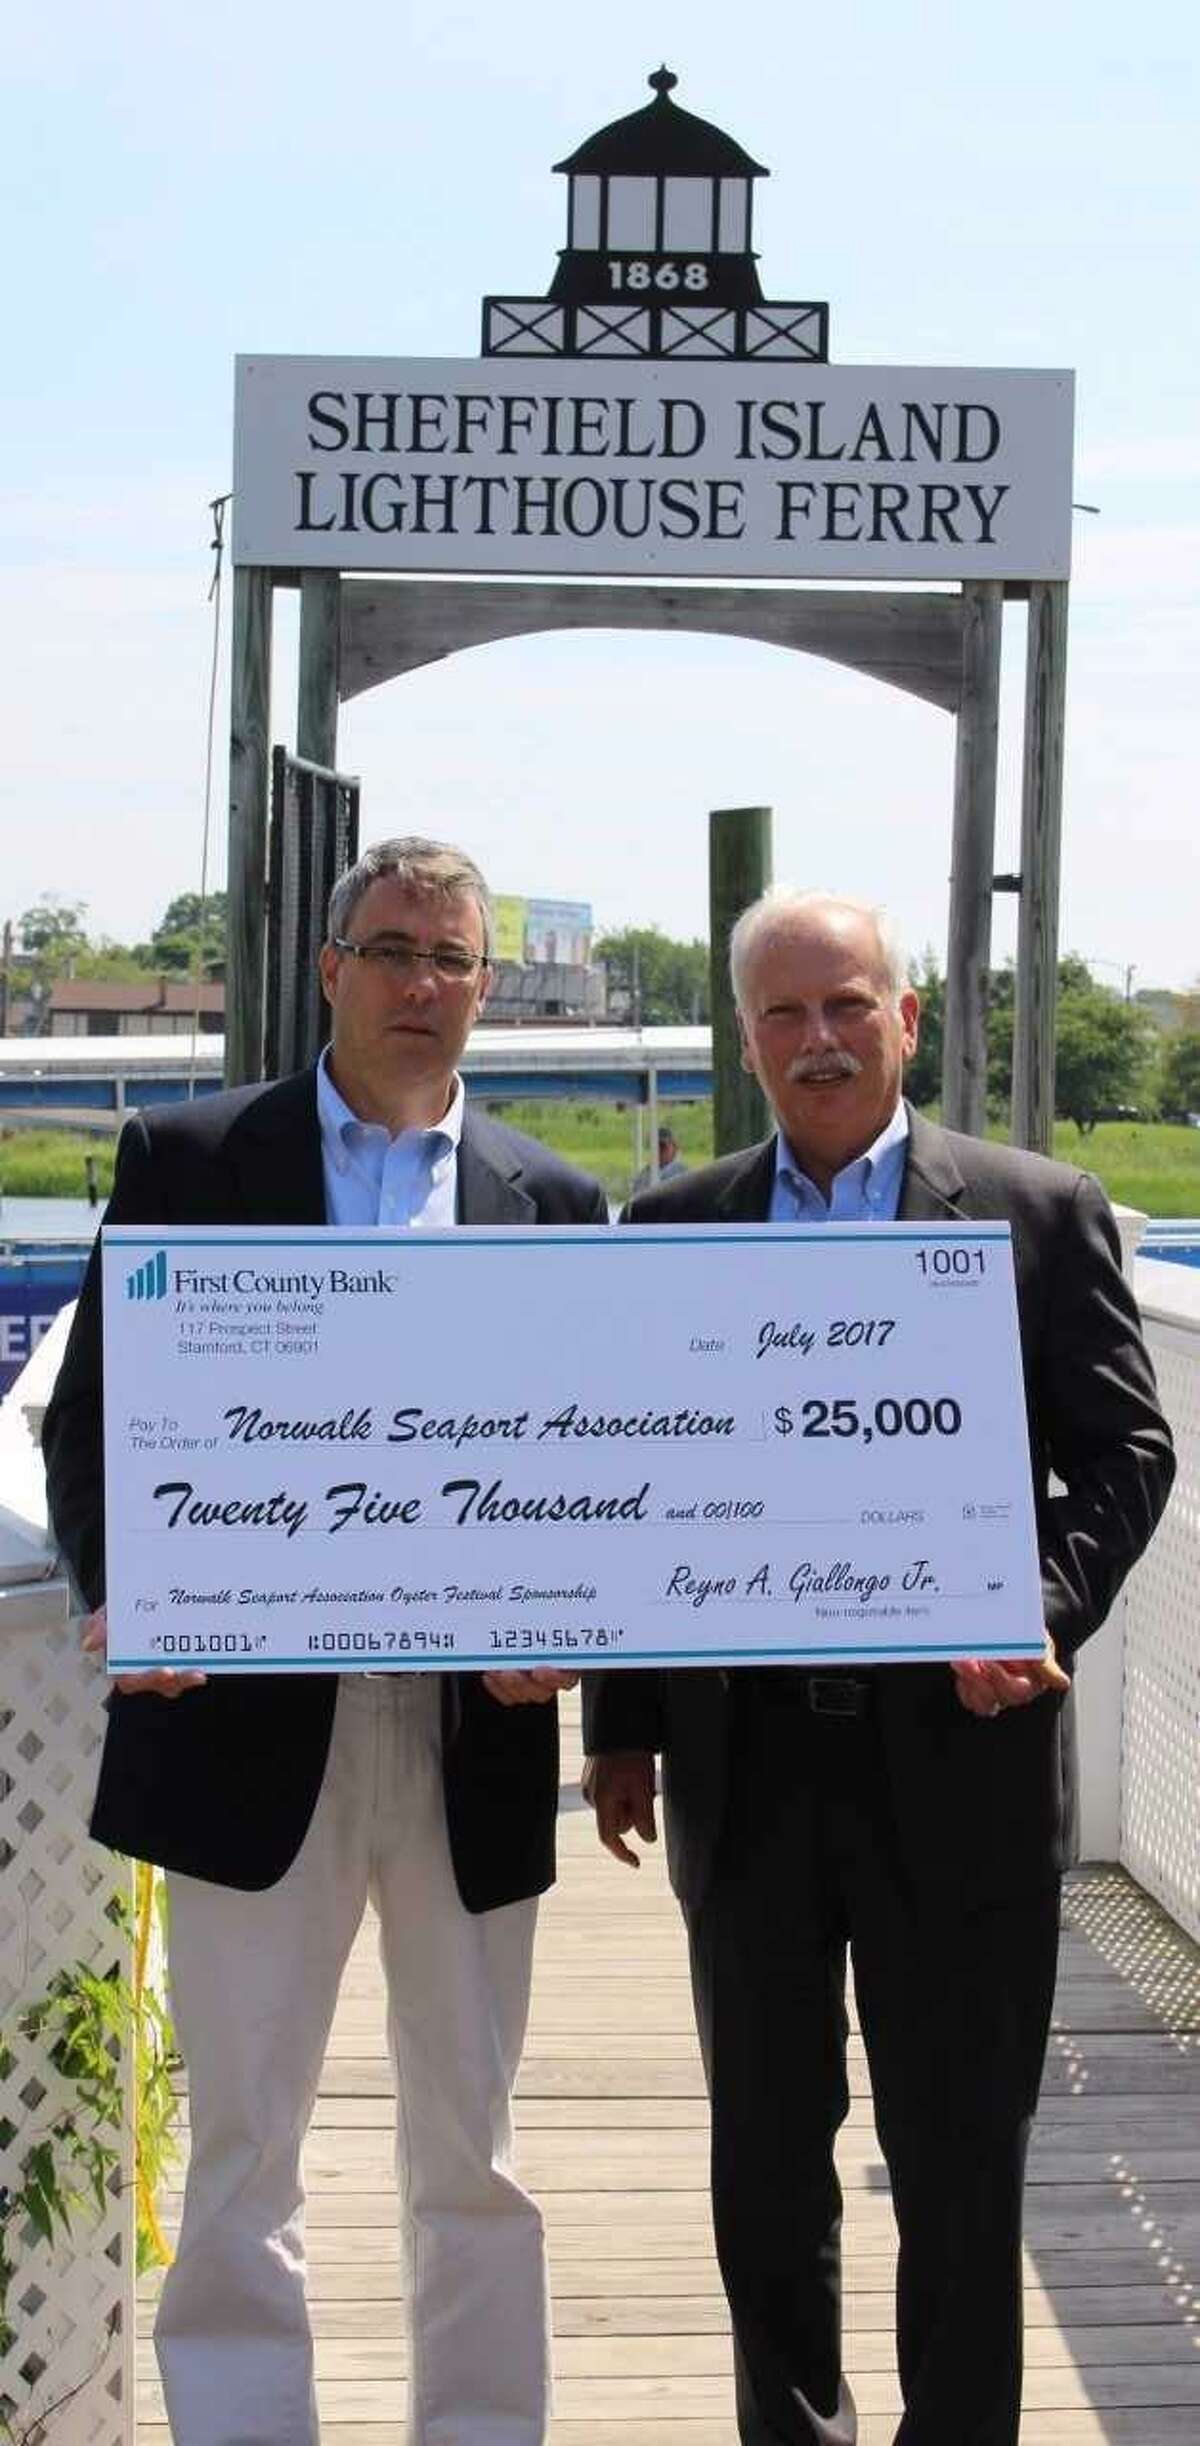 Mike Reilly, Norwalk Seaport Association president and Oyster Festival chairman, along with Reyno Giallongo, chairman and CEO, First County Bank. As the presenting sponsor, First County Bank presents their sponsorship check to the Norwalk Seaport Association for the 2017 Oyster Festival.